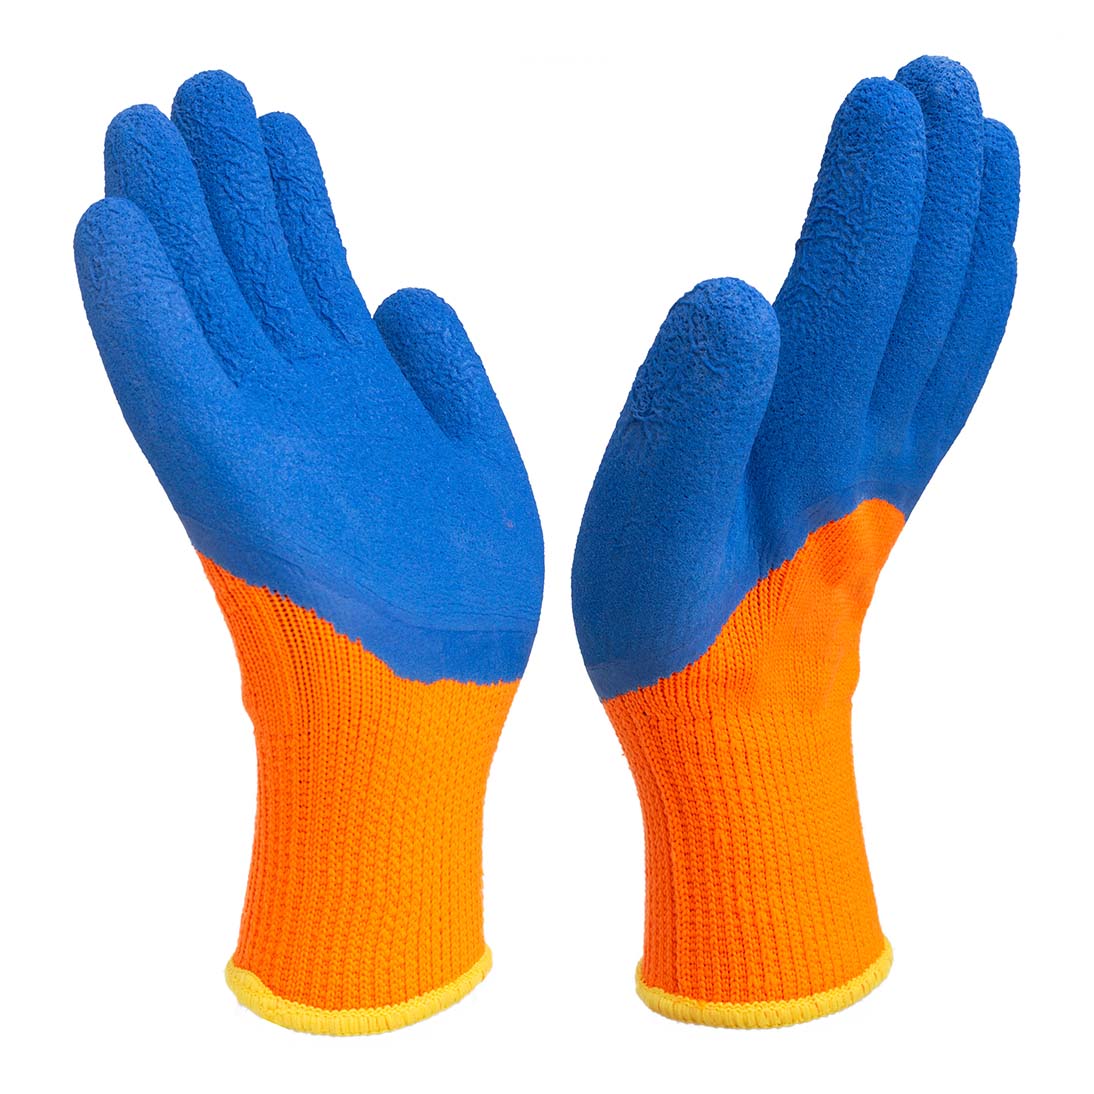 7G Polyester terry brushed latex coated winter glove economic 